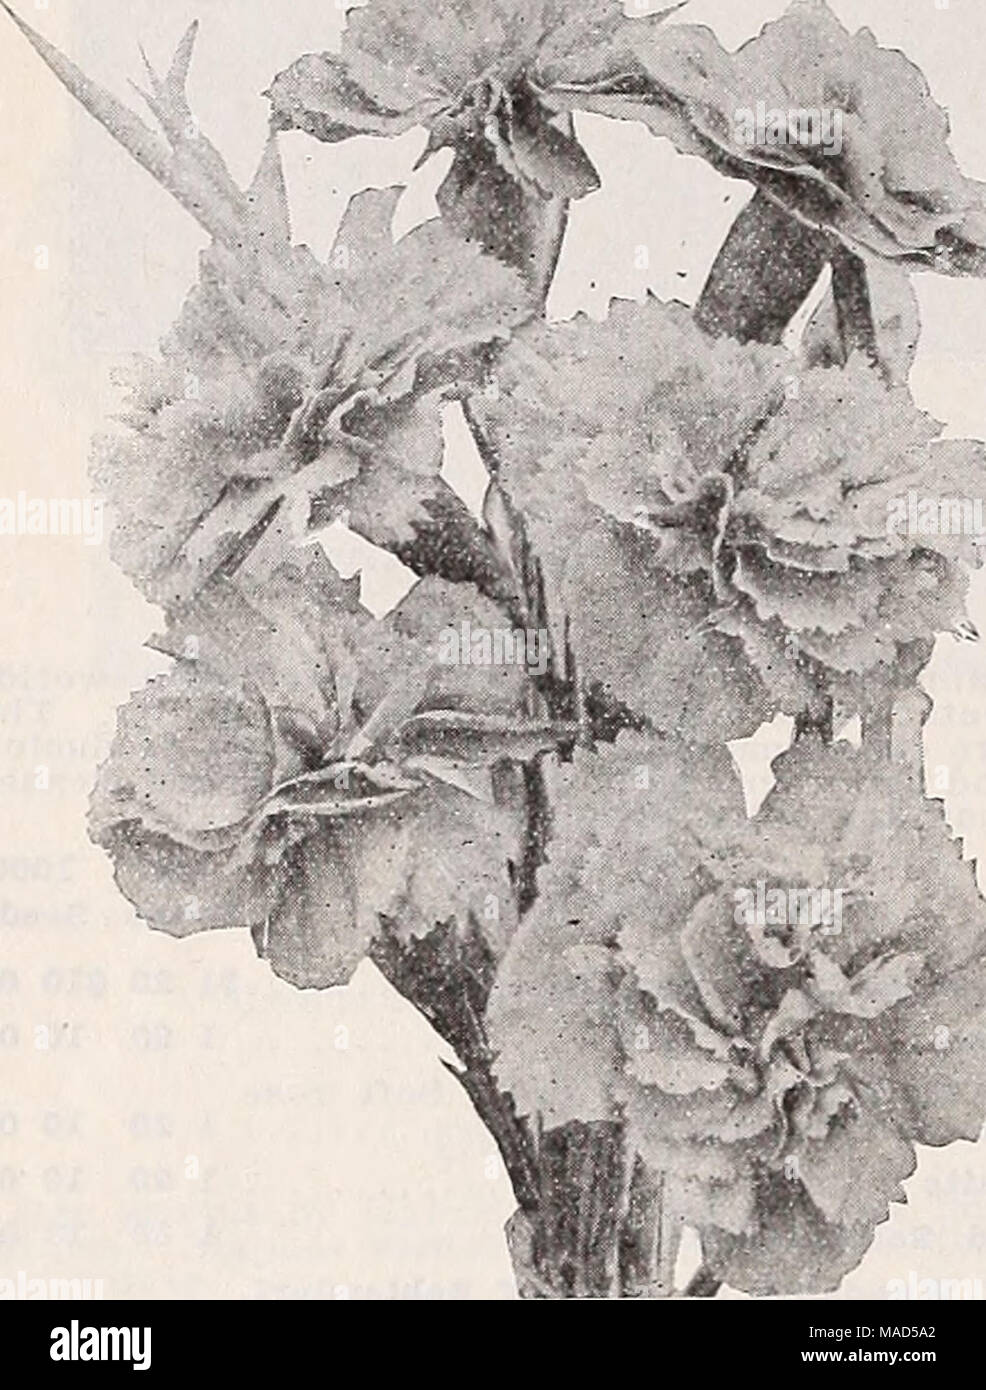 . Dreer's wholesale catalog for florists : winter - spring - summer 1938 . Dianthus, Salmon King Dianthus—^Pinks Double-Flowering Annual Pinks Tr. pkt. Oz. Chlnensis Giant Mixed (China Pinks) $0 10 $0 40 Dladeinalras (Diadem Pinks). Mixed. Extra fine 15 60 Fireball. Fiery scarlet 20 75 Keddewlgl, lUzed (Double Japan Pinks). Extra fine. % lb. $1.50 15 60 Zinolfer. Rich Geranium red 25 1 00 Bloumlnff Oloak. Maroon, edged white.... 20 75 Ptnlc Beaaty. Finest pure pink 25 1 25 Salmon King. Bright salmon-rose 25 1 00 Saovball. A beautiful double white 20 75 Violet Qaeen. Rich violet 25 1 00 Single- Stock Photo